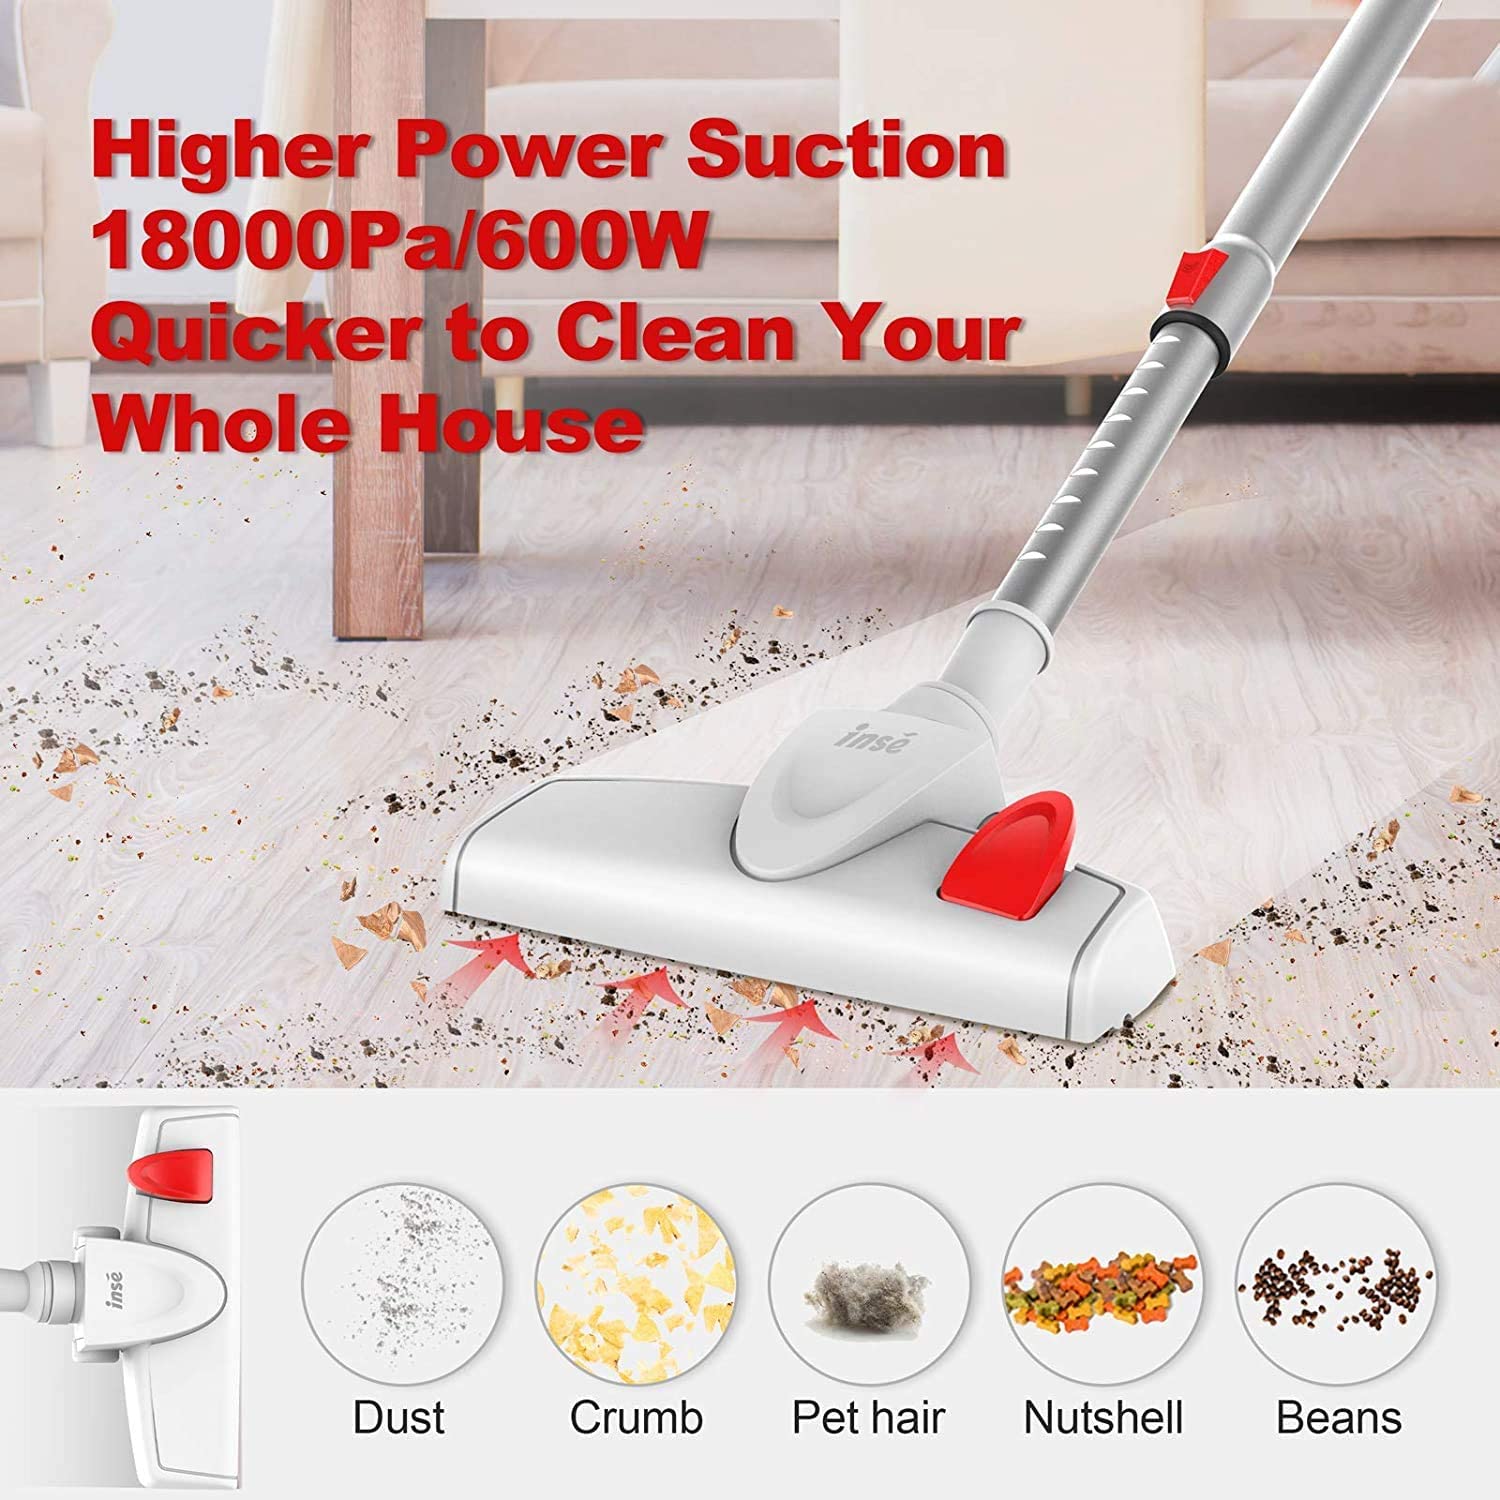 INSE Corded Vacuum Cleaner, 3 in 1 Lightweight Stick Vacuum Cleaner with High Density HEPA Filtration - White